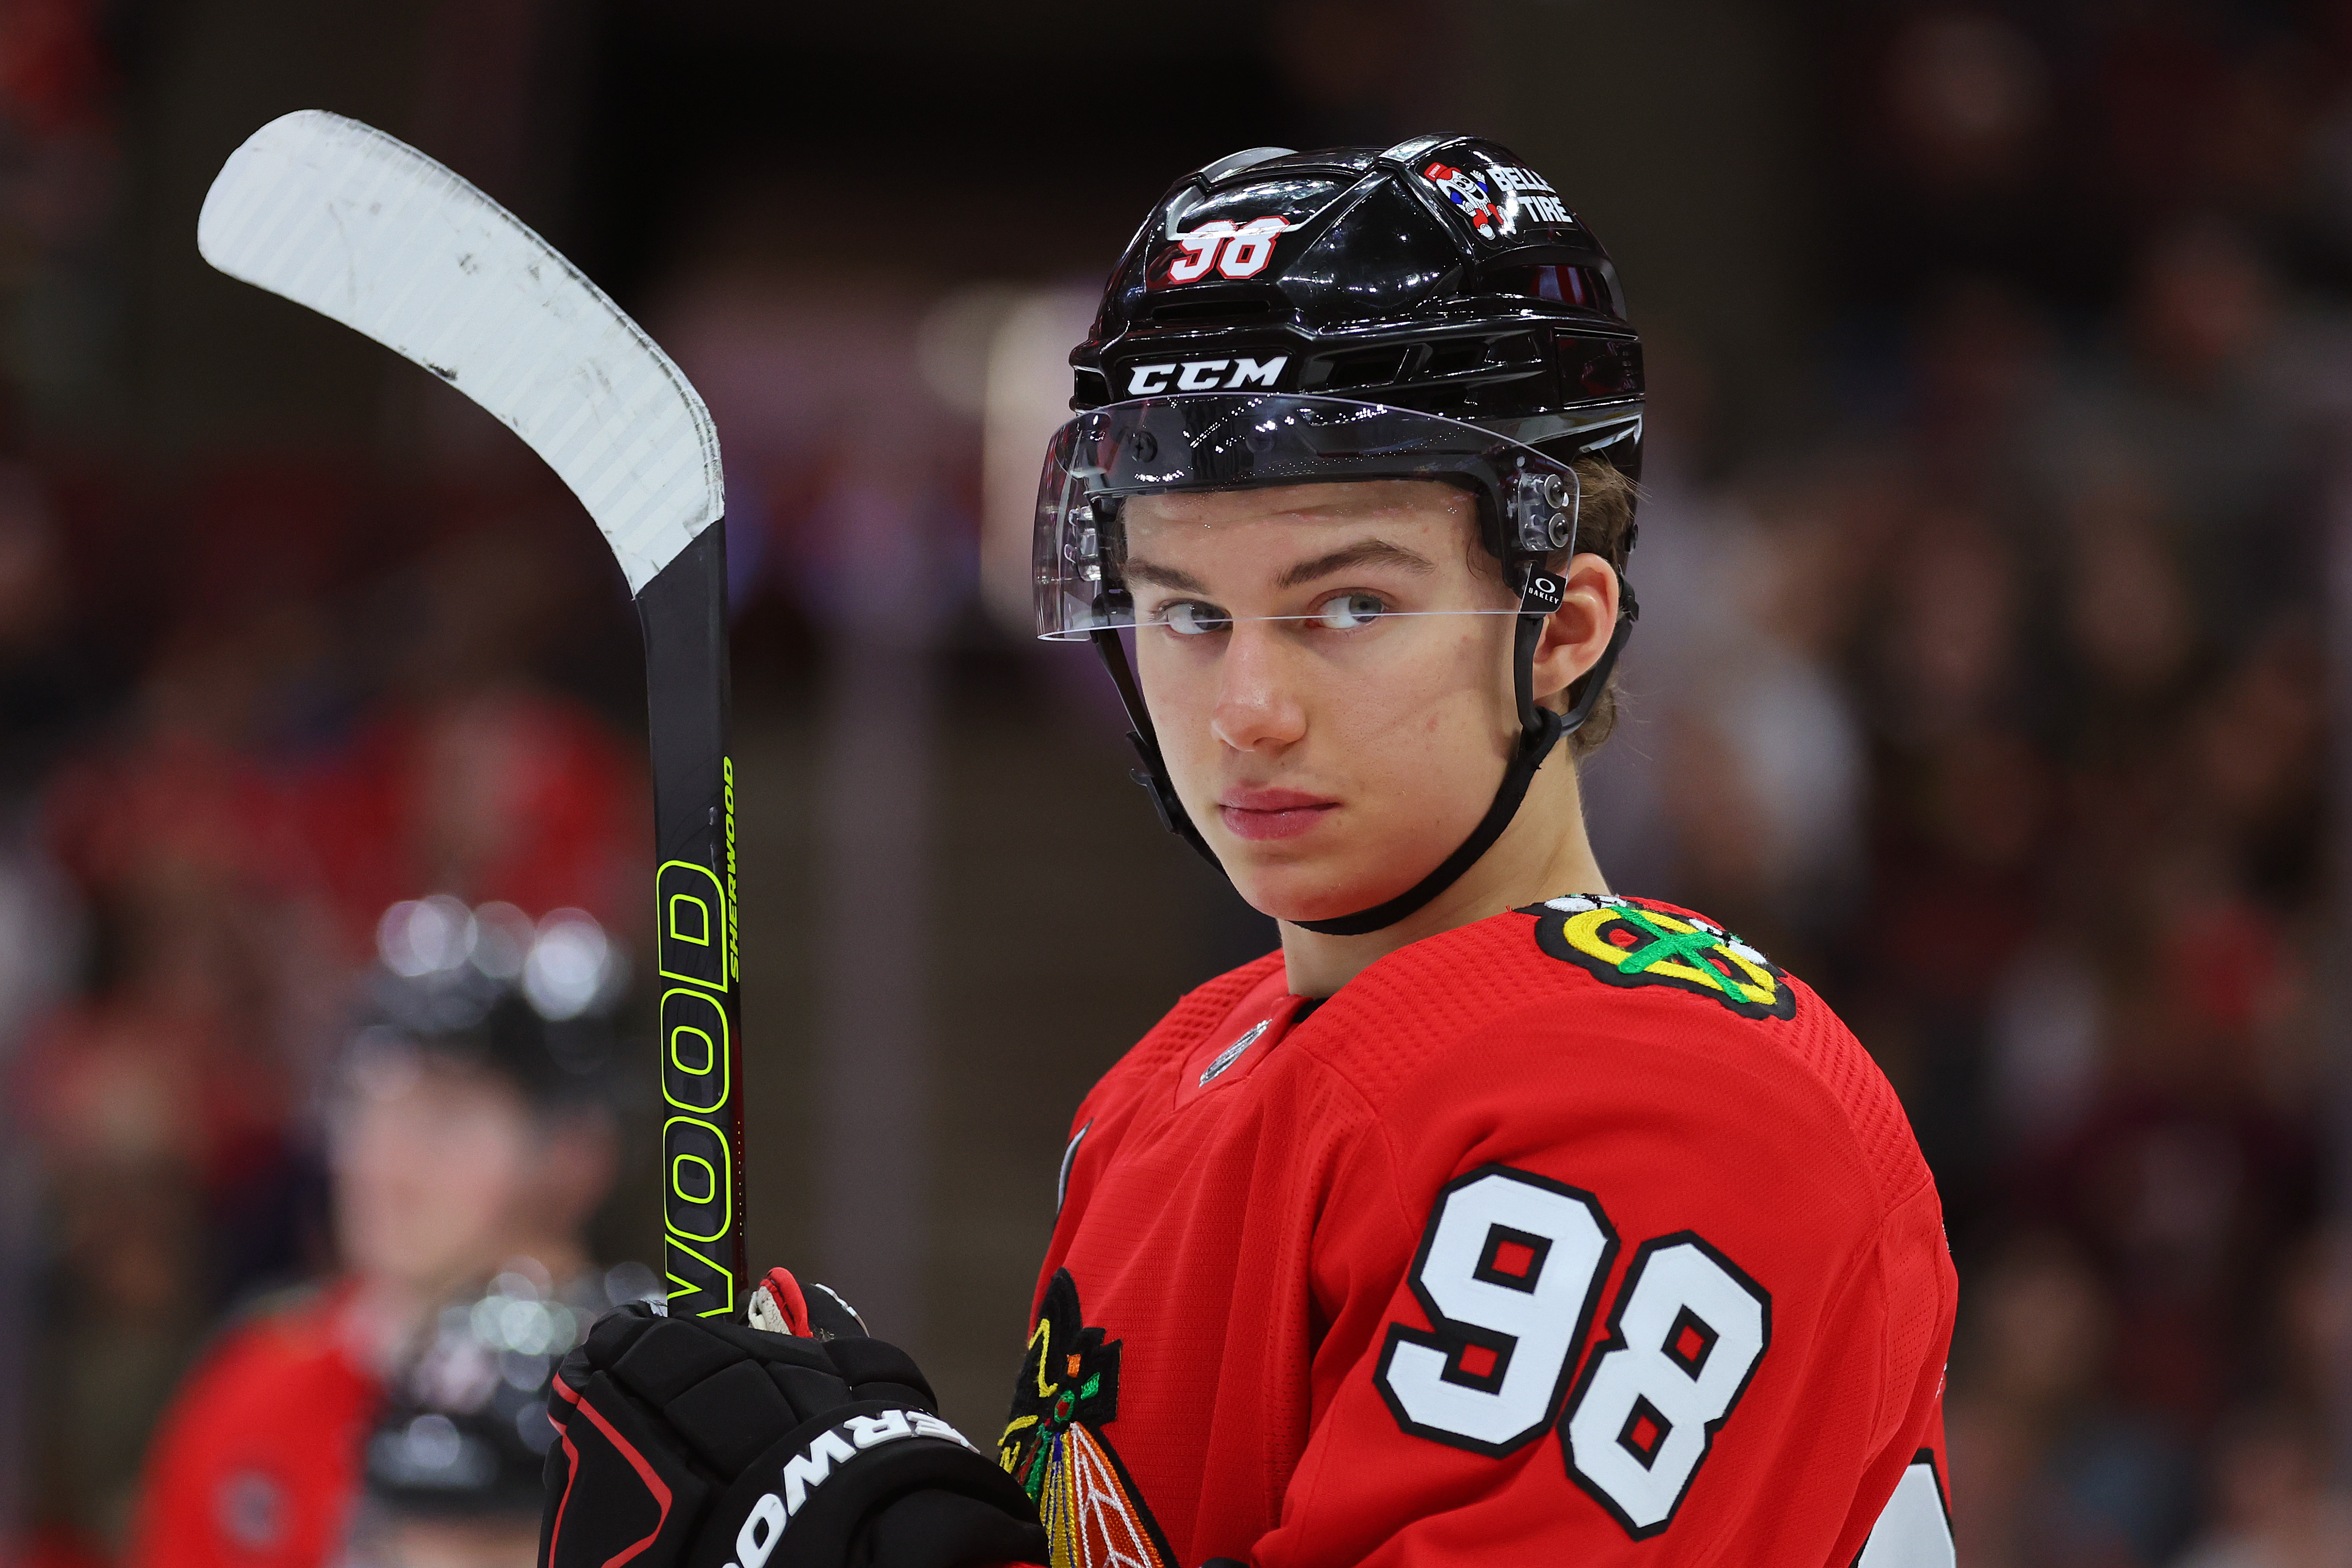 MacKenzie Entwistle Should Make The Blackhawks Roster - Committed